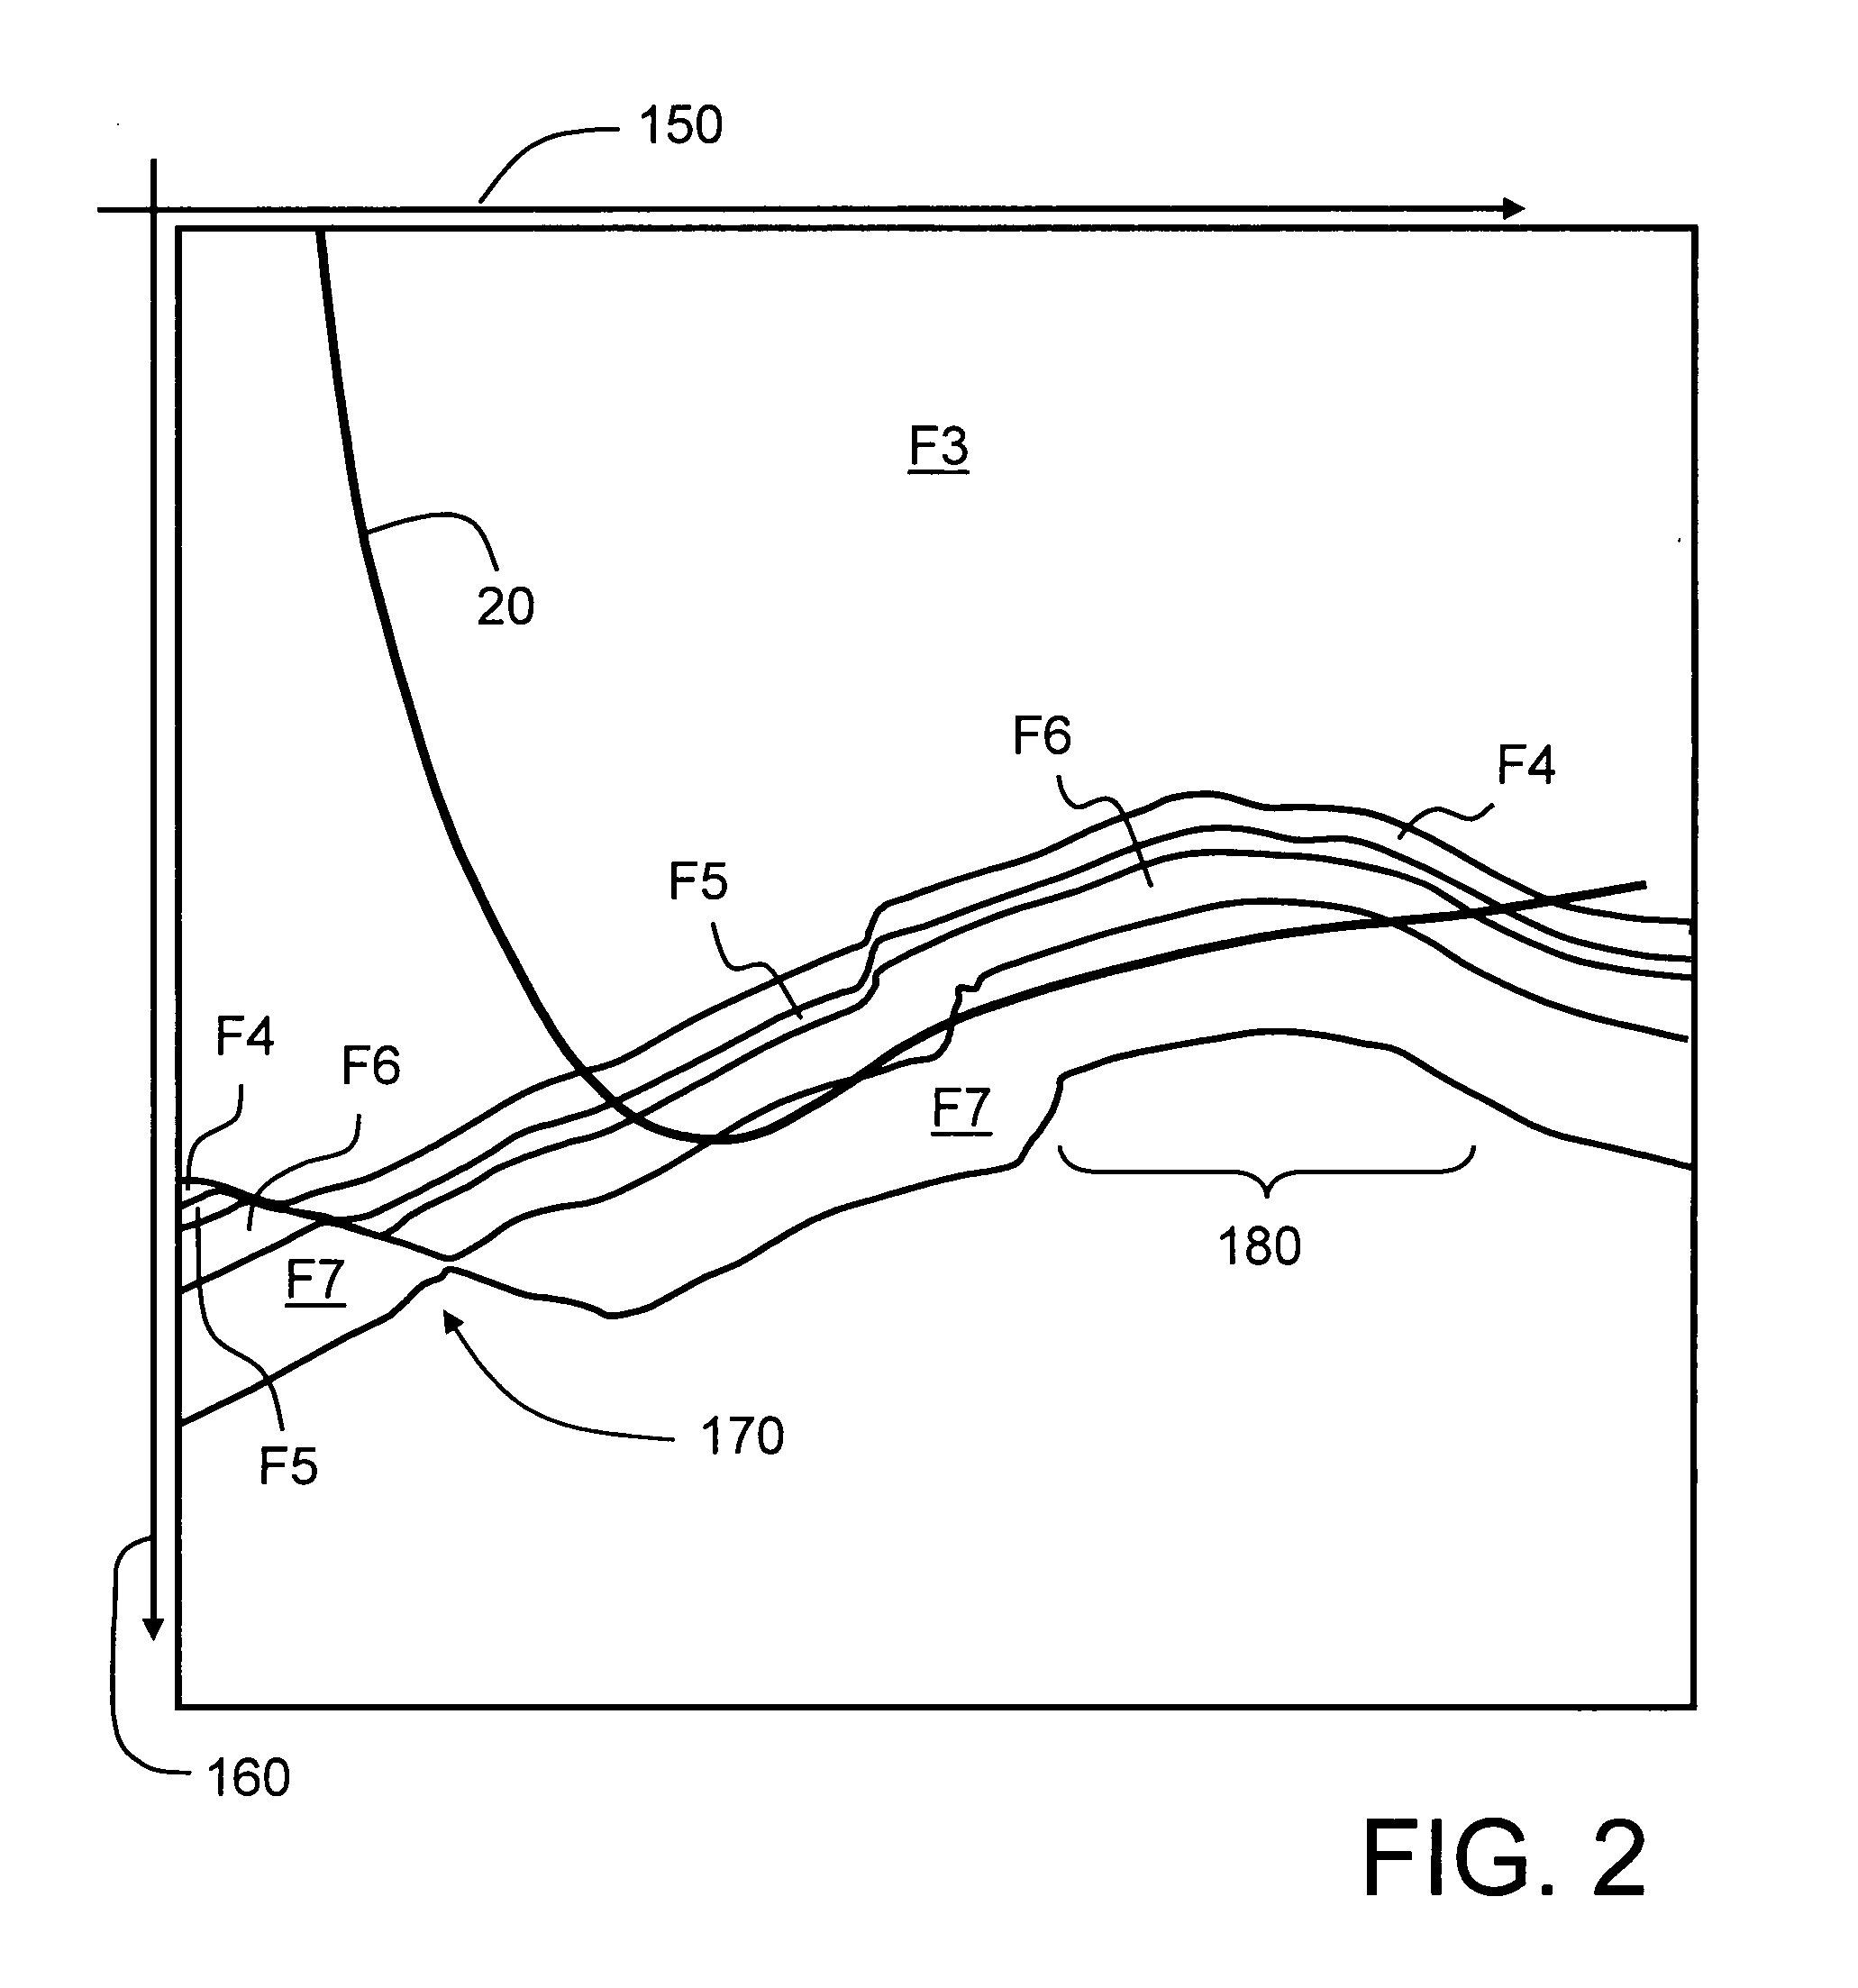 Method of processing geological data